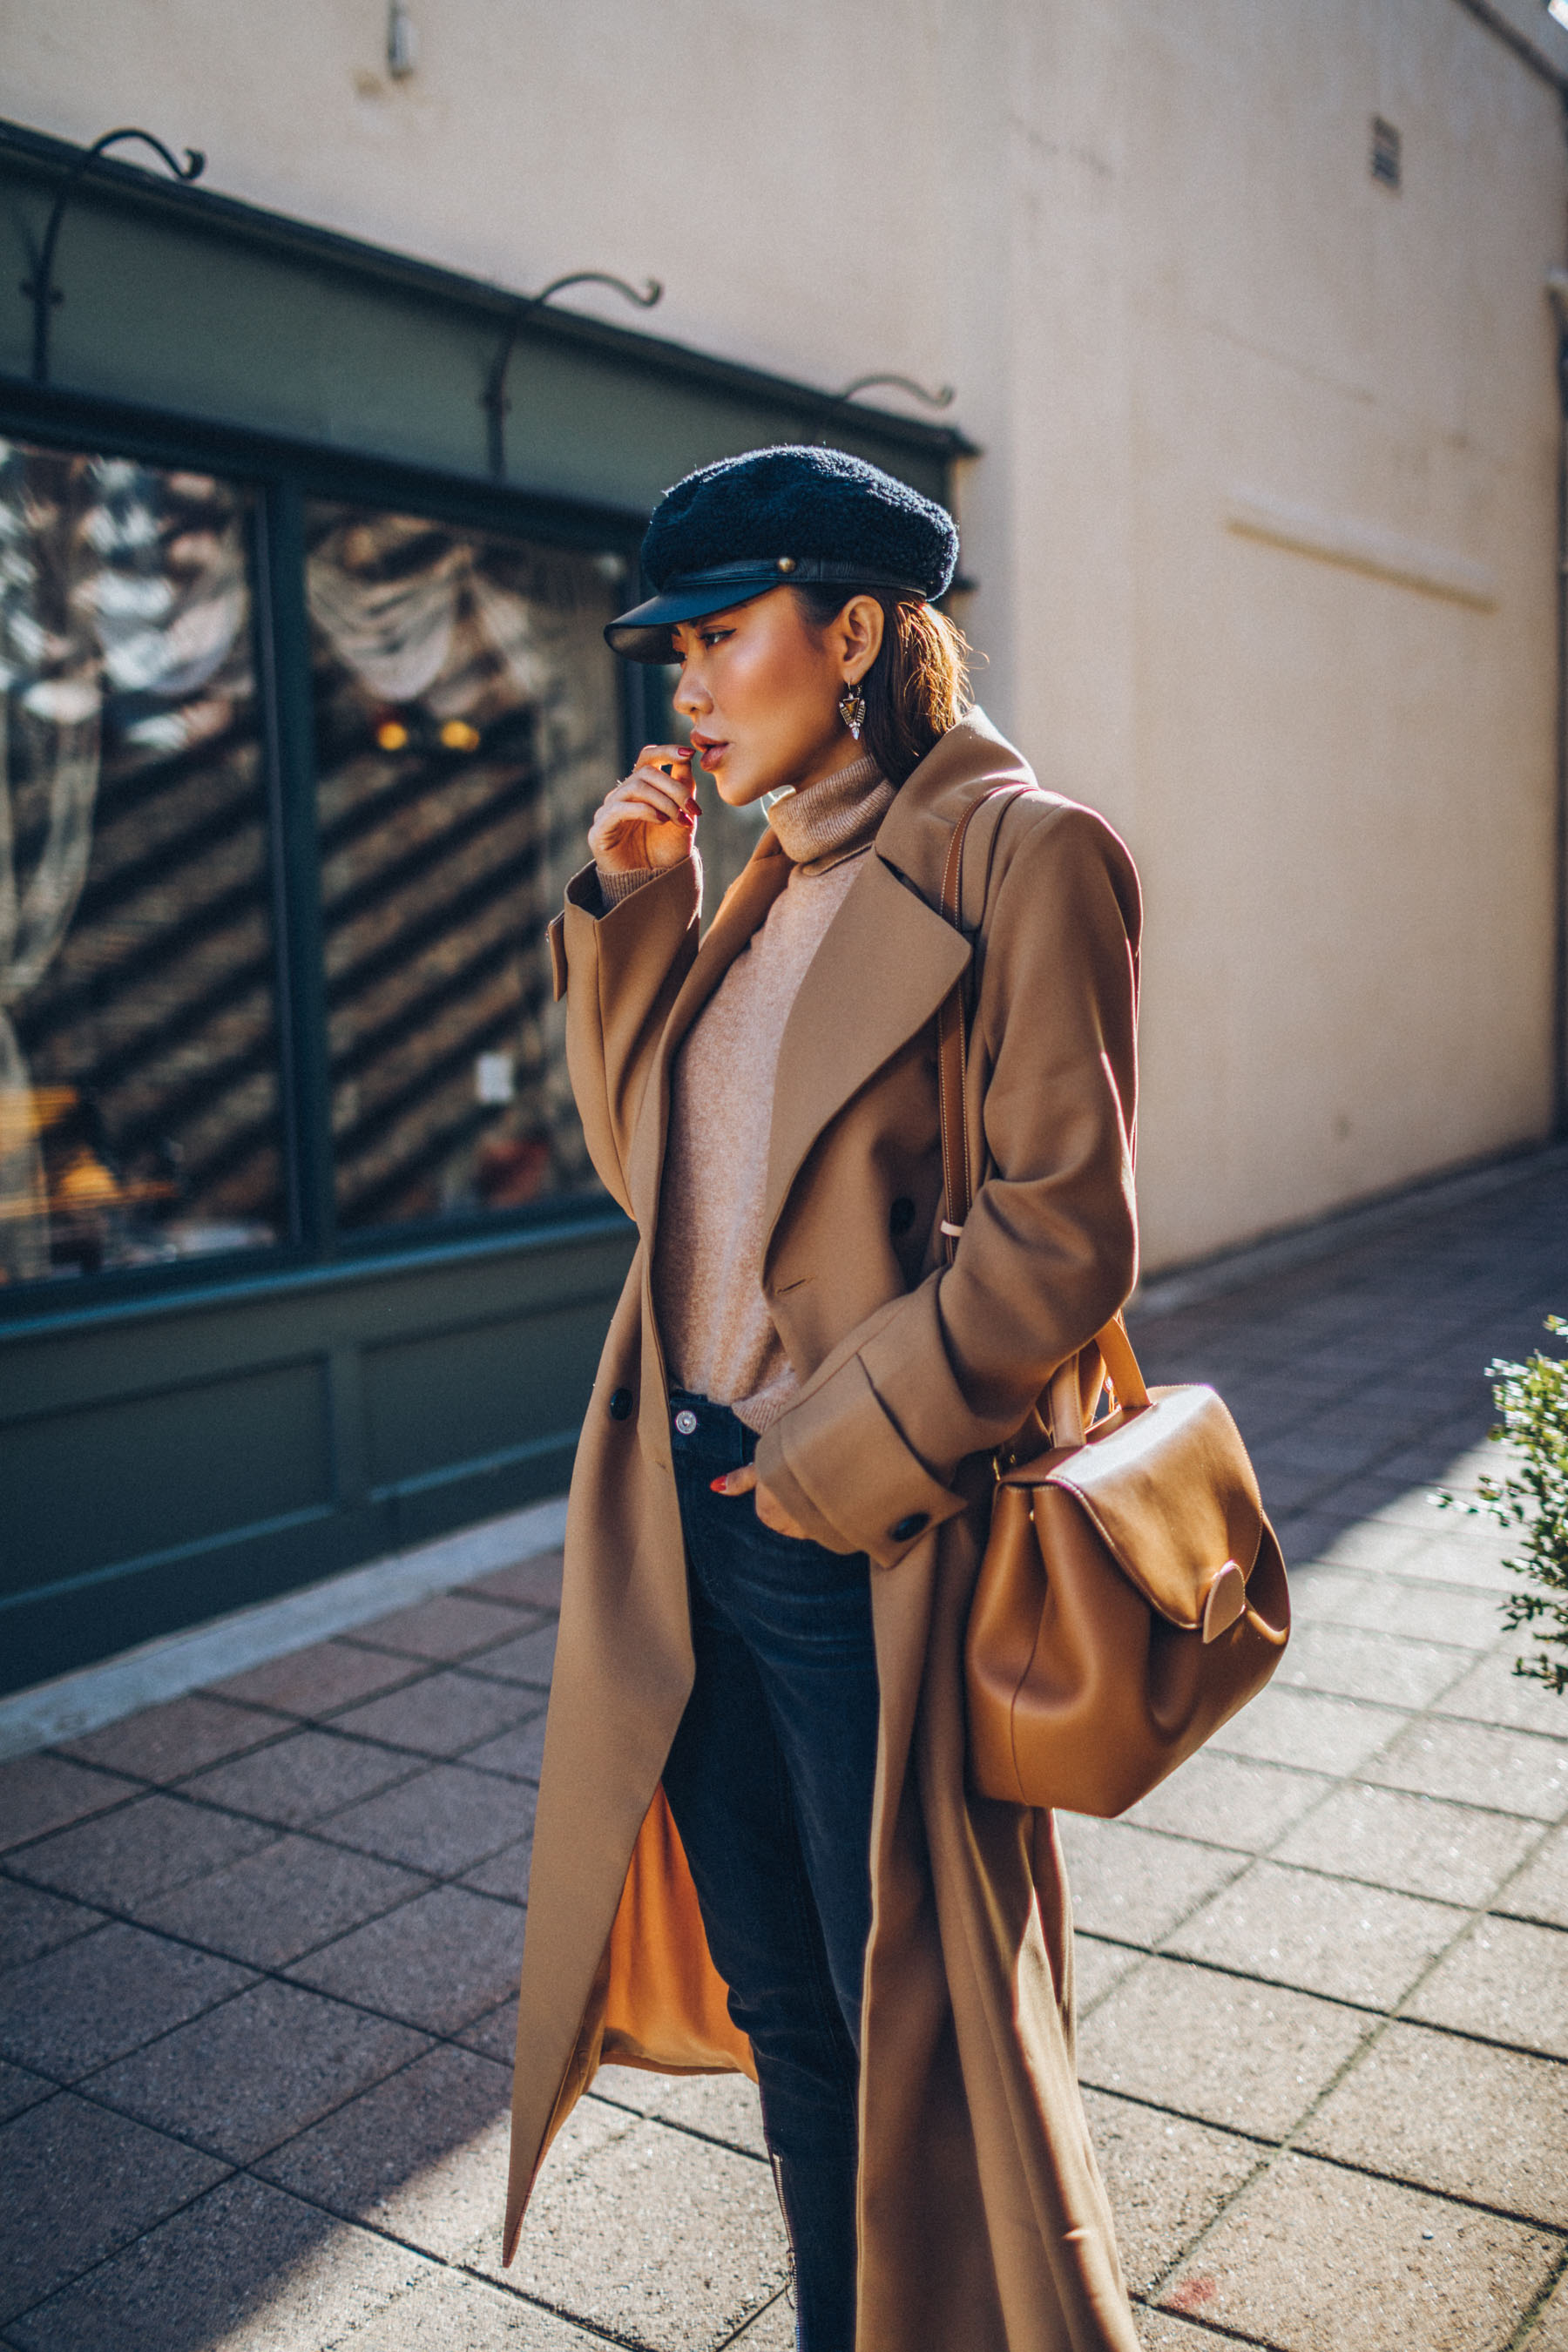 How to Buy an Investment Coat - Belted Camel Coat with Dark Denim Baker Boy Cap and Satchel // Notjessfashion.com // New York fashion blogger, asian blogger, classic camel coat, winter outfit, classic winter outfit, cozy layered outfut, nude boots, nude bag, baker boy hat, how to style camel coat, jessica wang, fashion blogger, street style, fashion blogger street style, oversized coat, duster coat, maxi coat